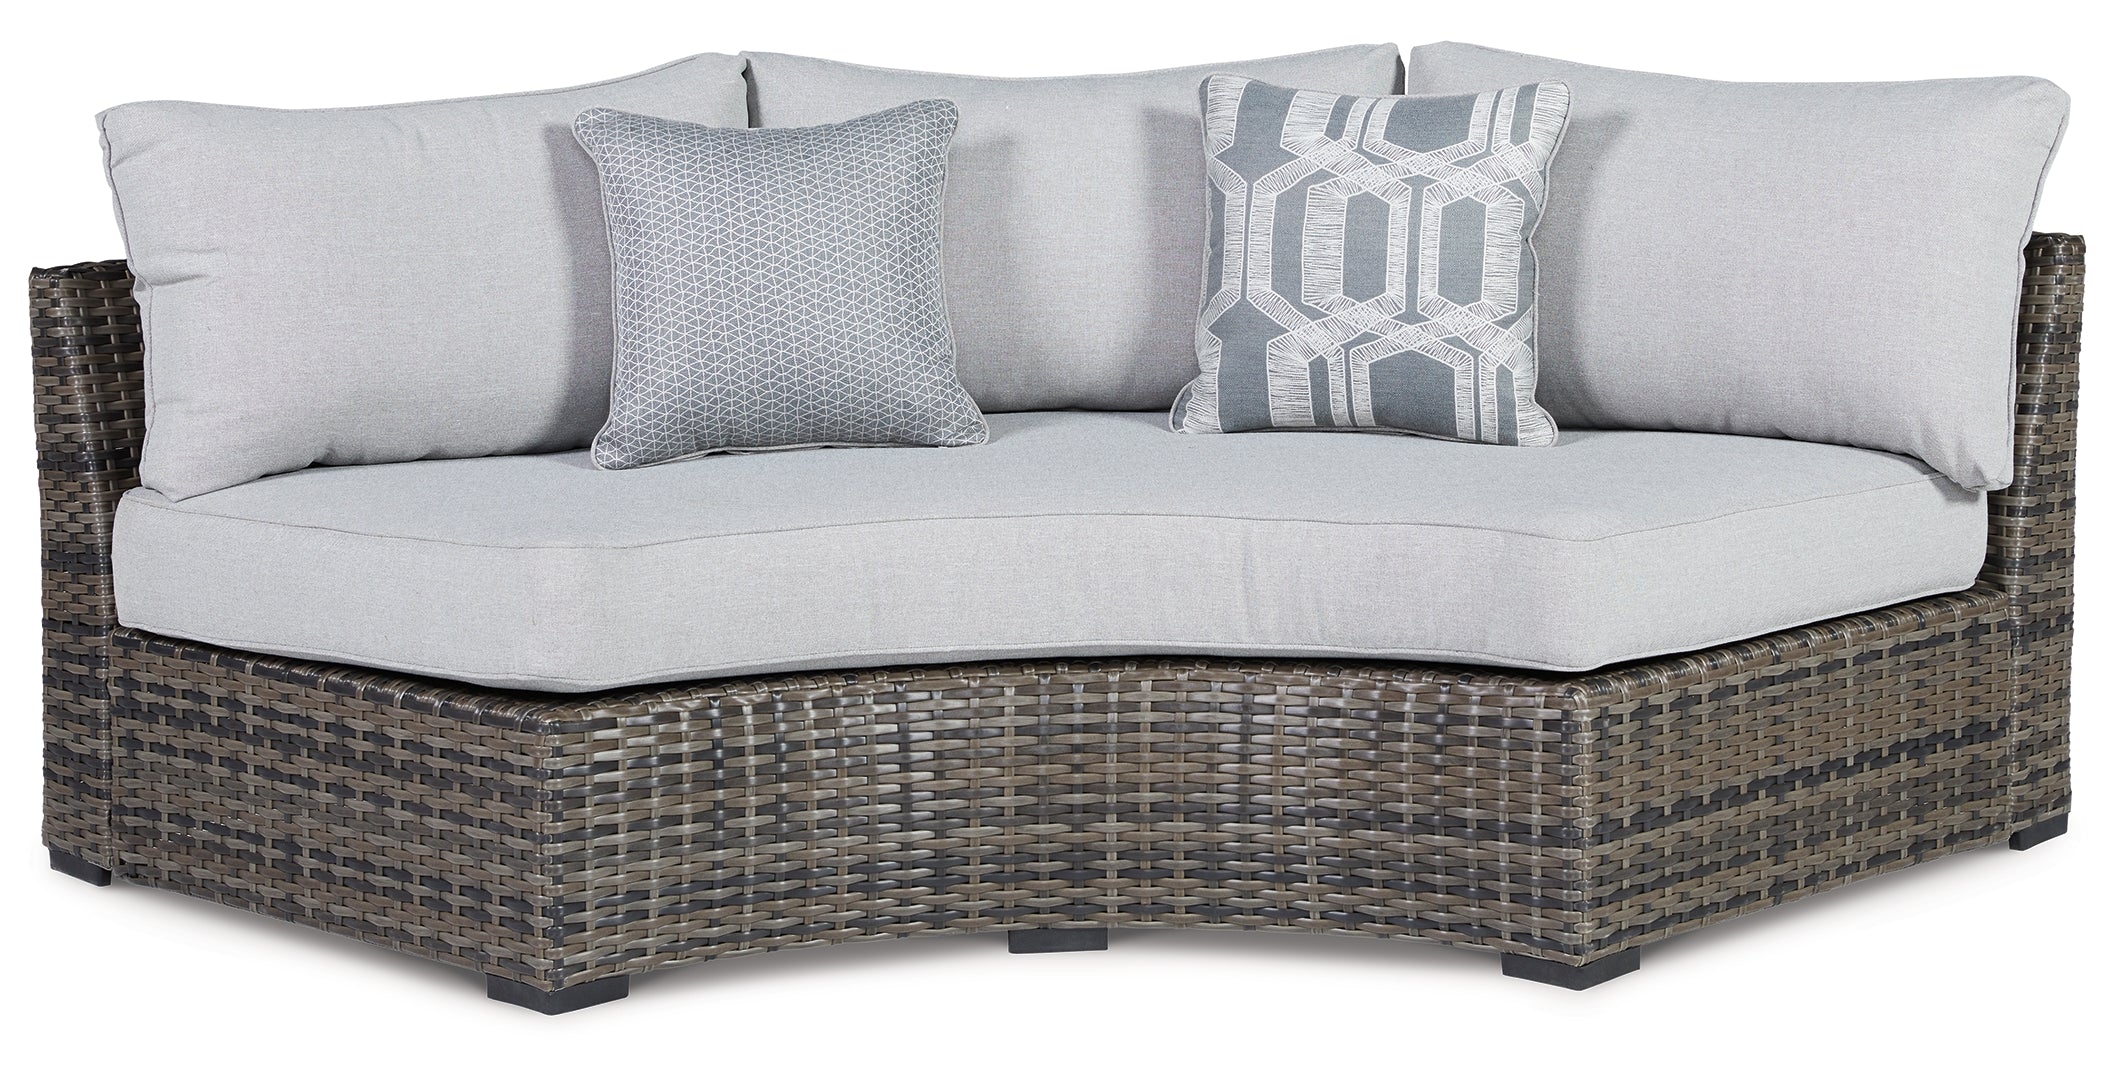 Harbor Court Curved Loveseat with Cushion